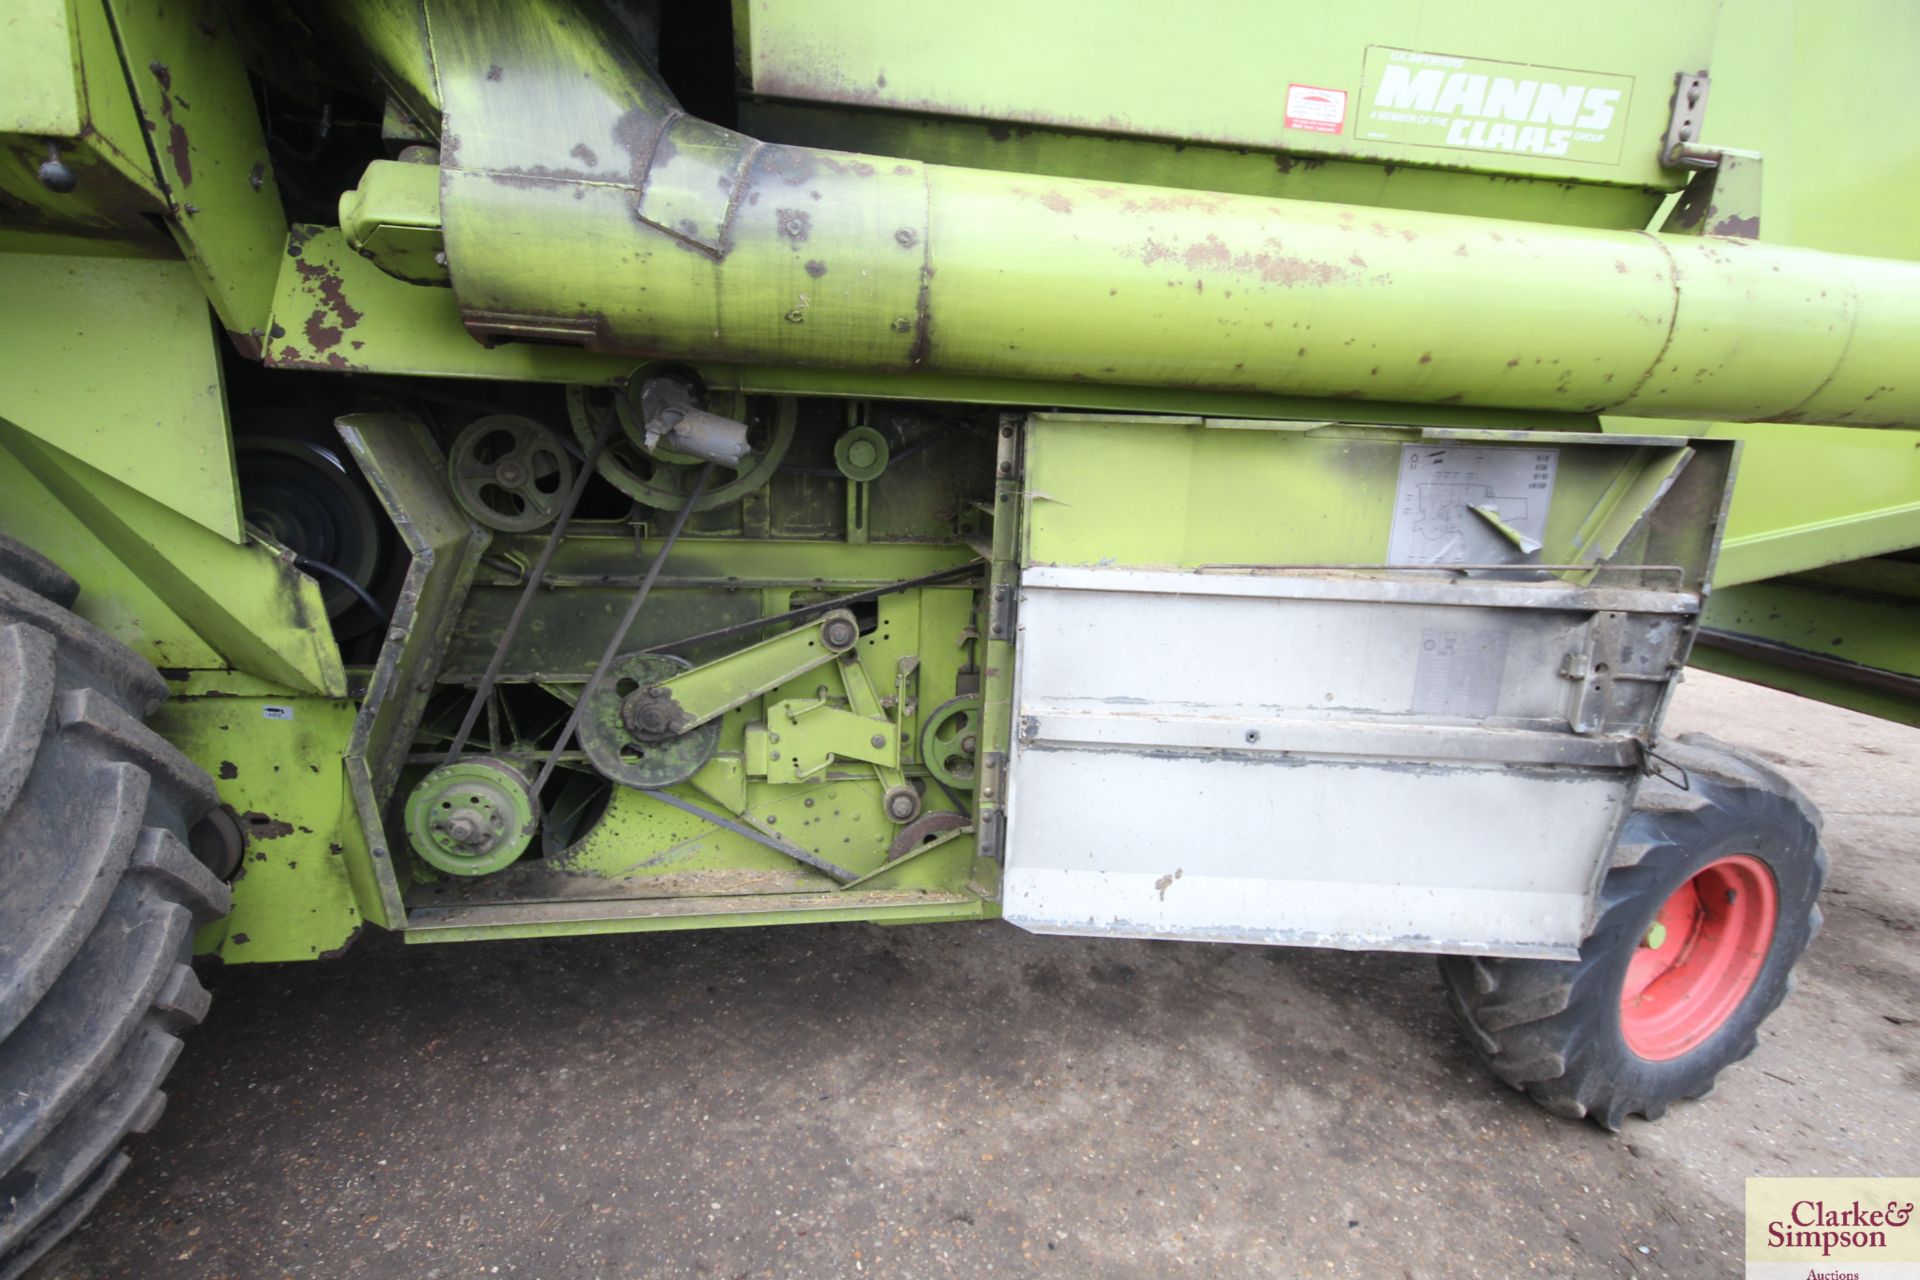 ** UPDATED HOURS ** Claas Dominator 98S combine. Registration E799 APU. Date of first registration - Image 46 of 120